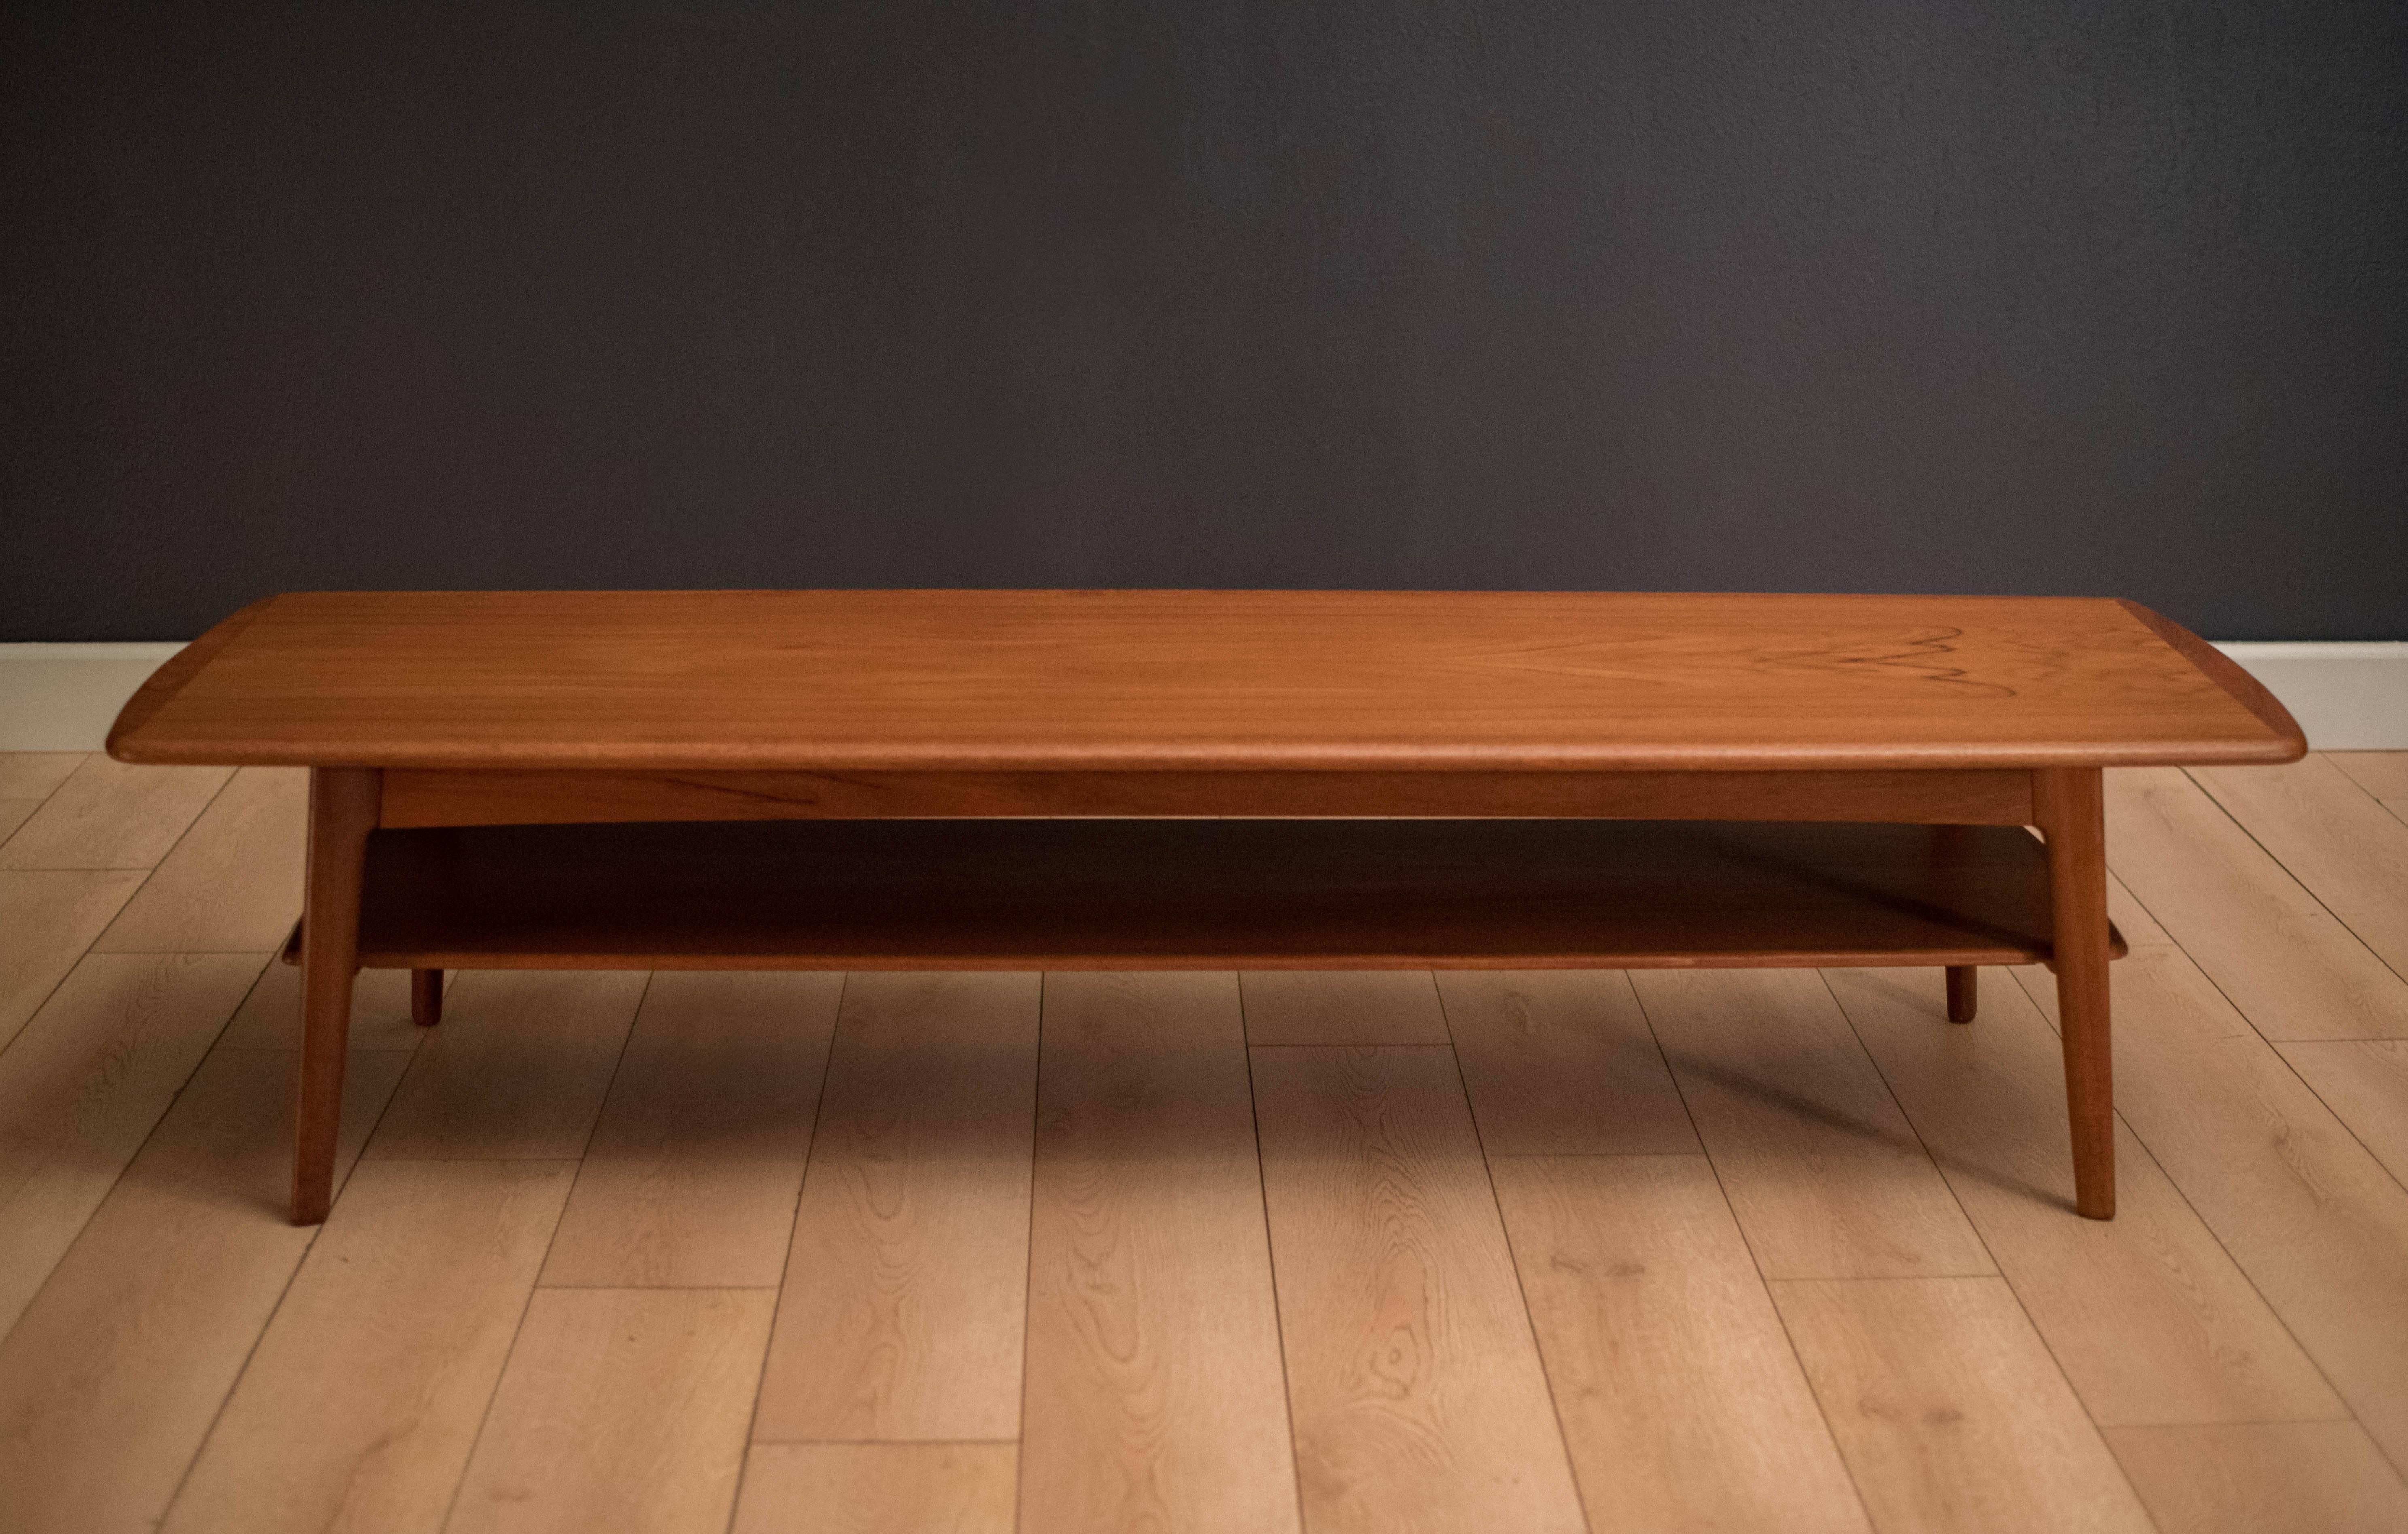 Mid-Century Modern long coffee table designed by Svend Aage Madsen for Karl Lindegaard Møbelfabrik in teak. This piece features solid sculpted edges and splayed tapered legs. Includes a lower tier display shelf.